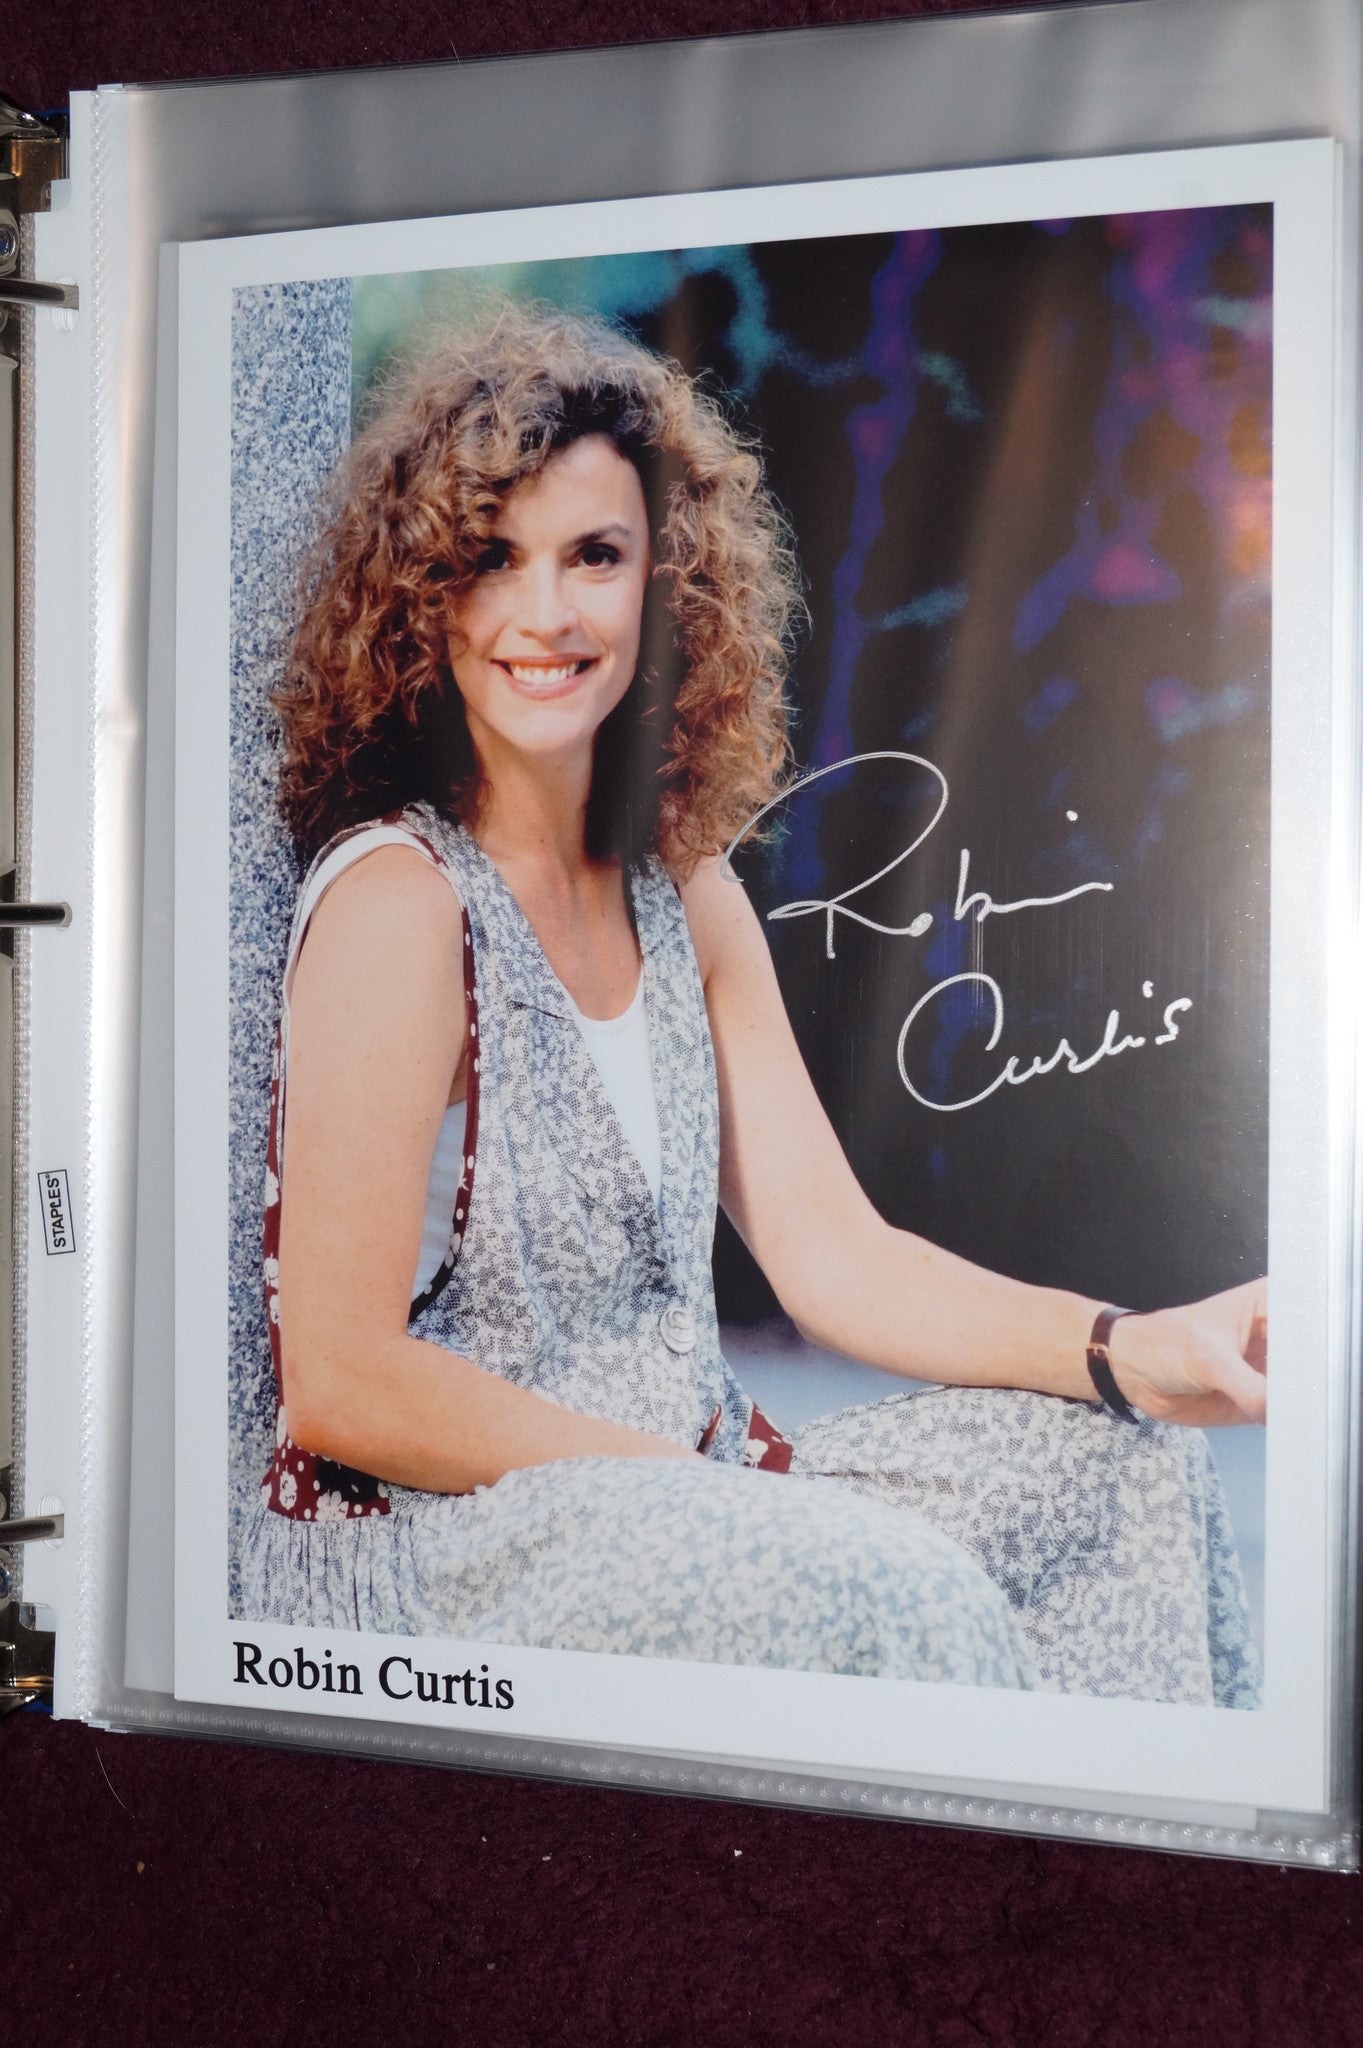 Autographed Photo "Robin Curtis"